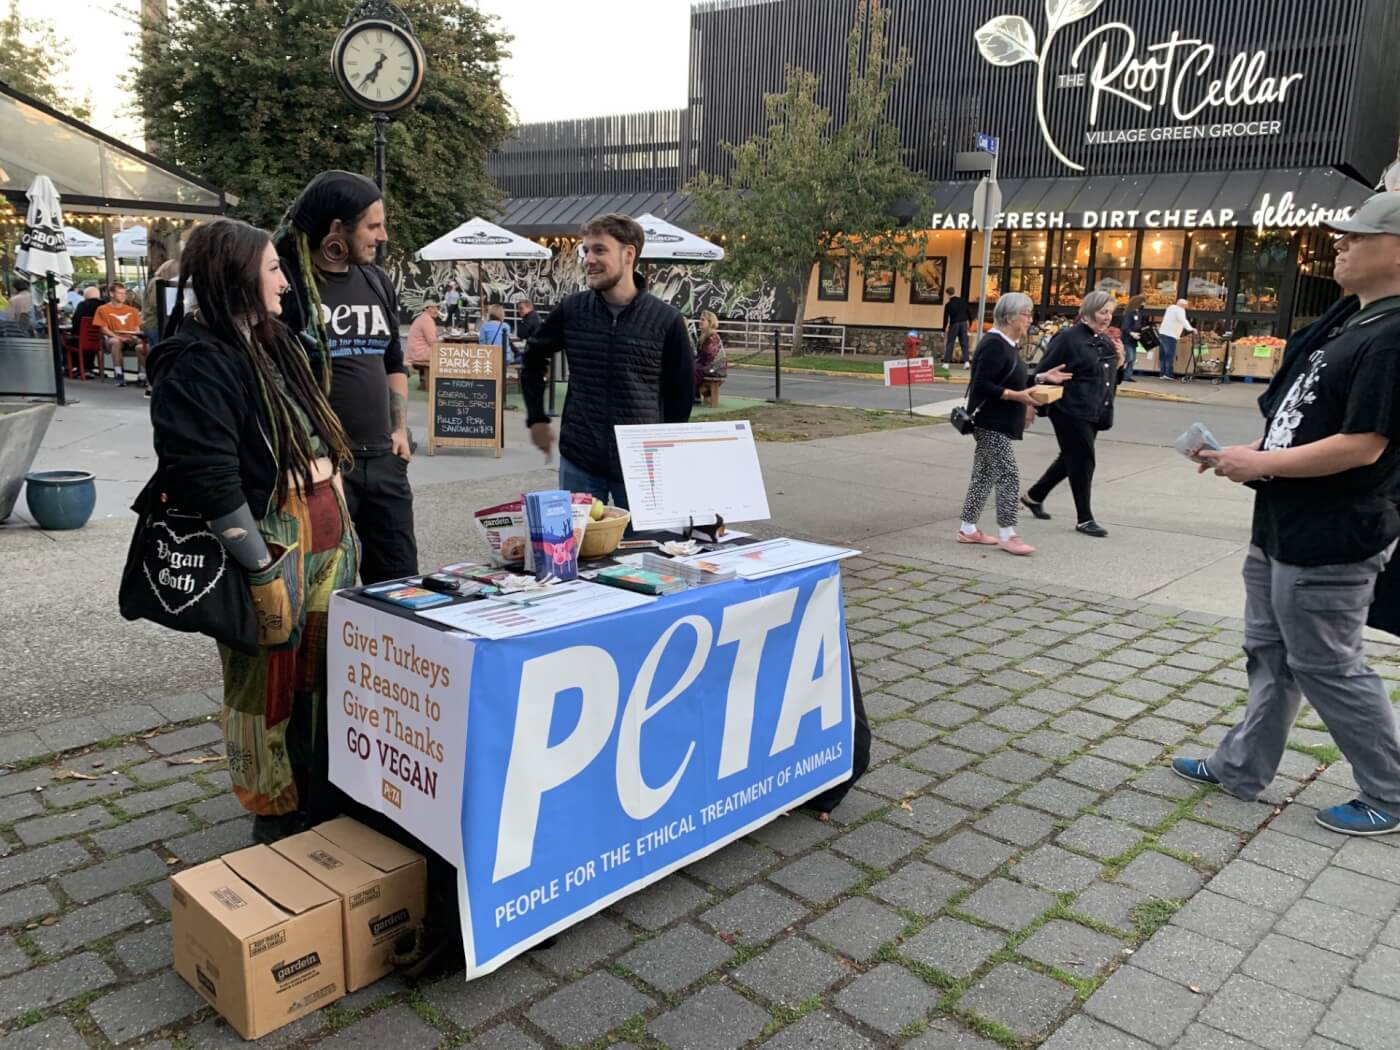 peta supporters in a busy plaza handing out leaflets about going vegan